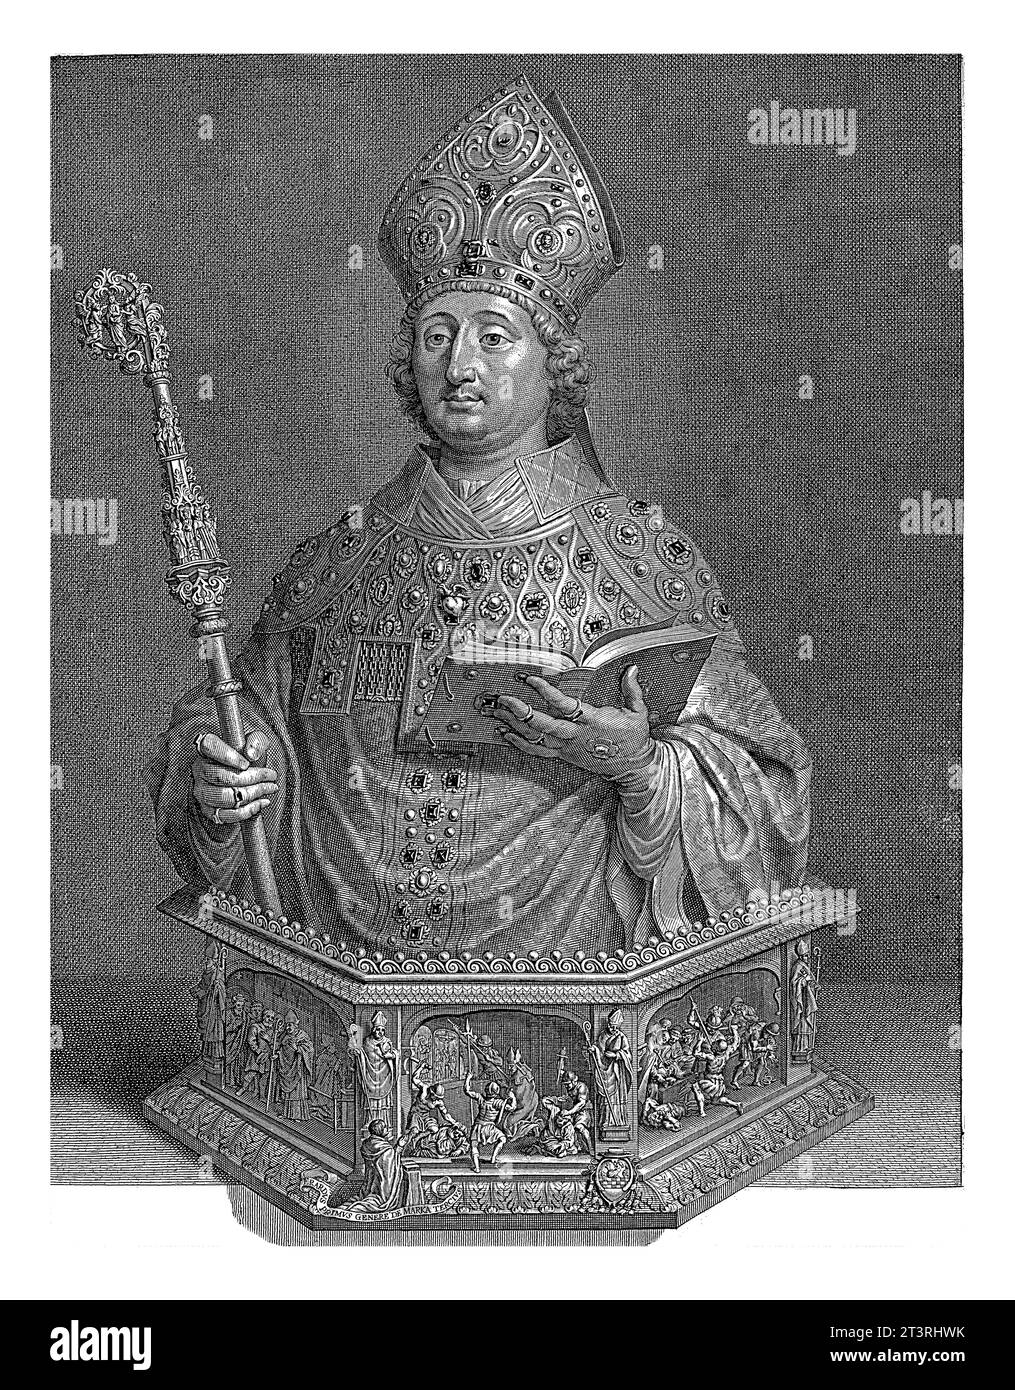 Reliquary bust of Saint Lambert of Maastricht, Michel Natalis, 1653 The reliquary bust of Saint Lambert of Maastricht in Liege inlaid with precious st Stock Photo